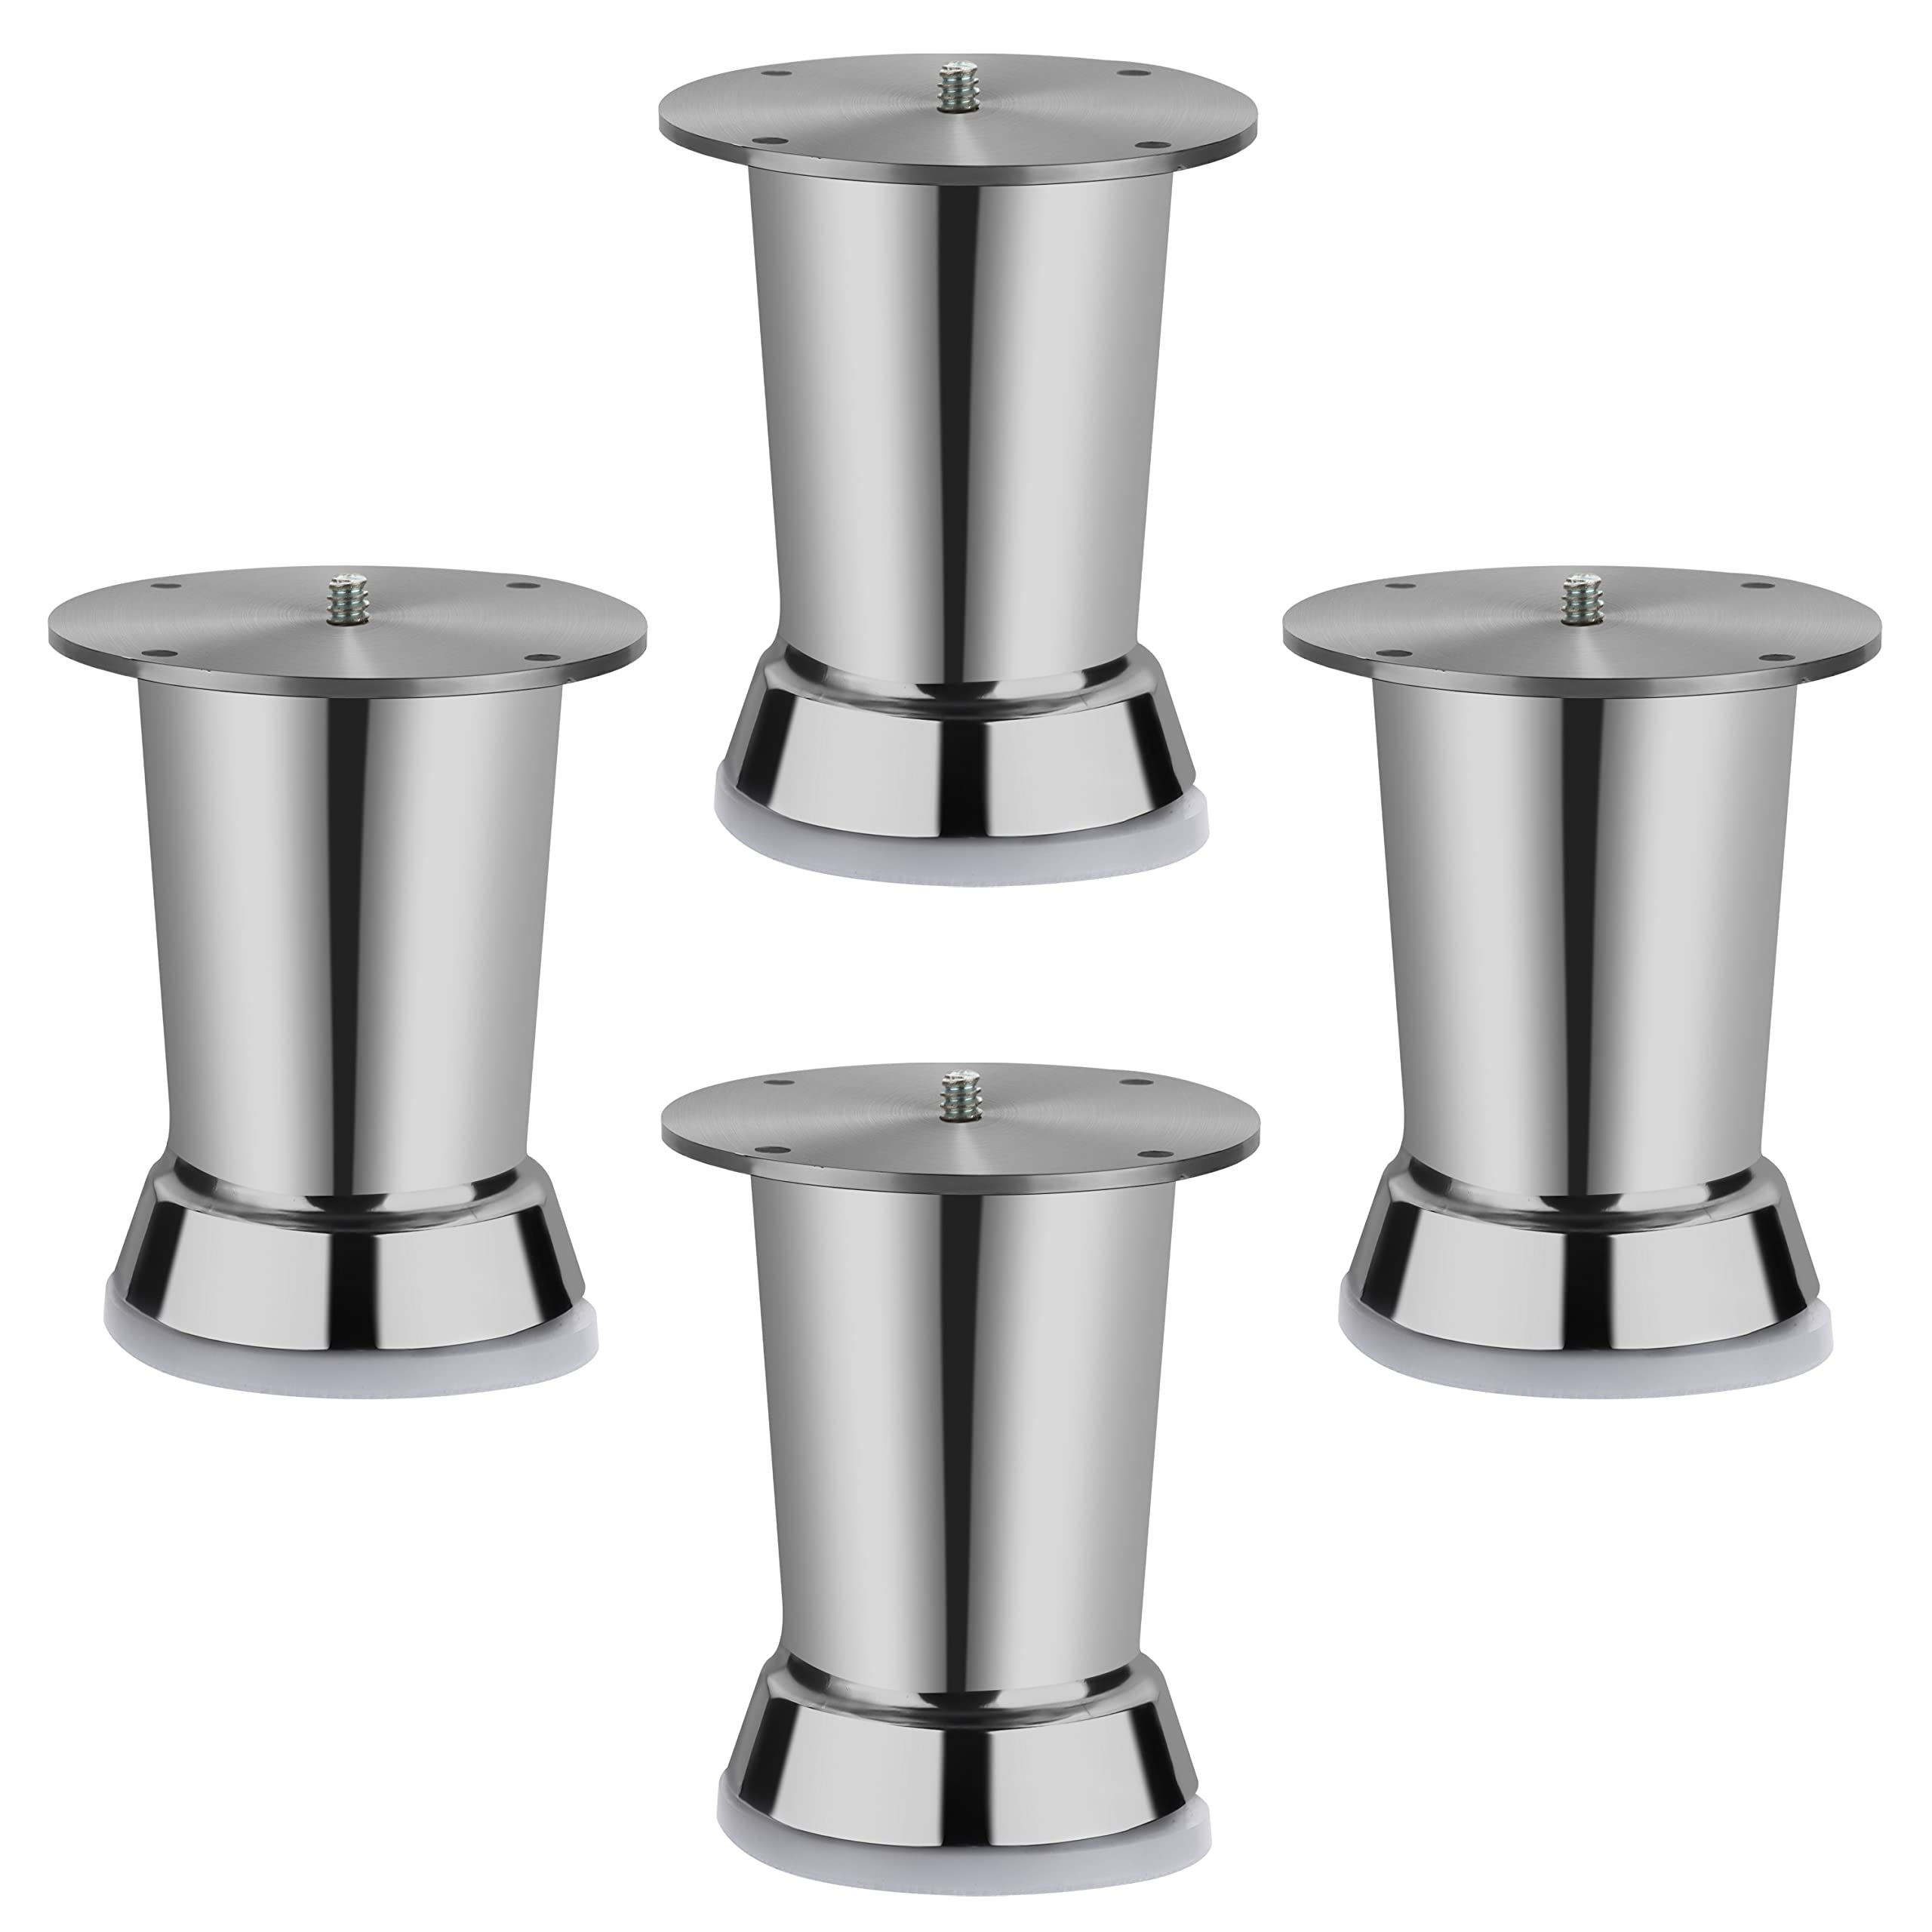 Plantex Heavy Duty Stainless Steel 4 inch Sofa Leg/Bed Furniture Leg Pair for Home Furnitures (DTS-51, Chrome) – Pcs - 10